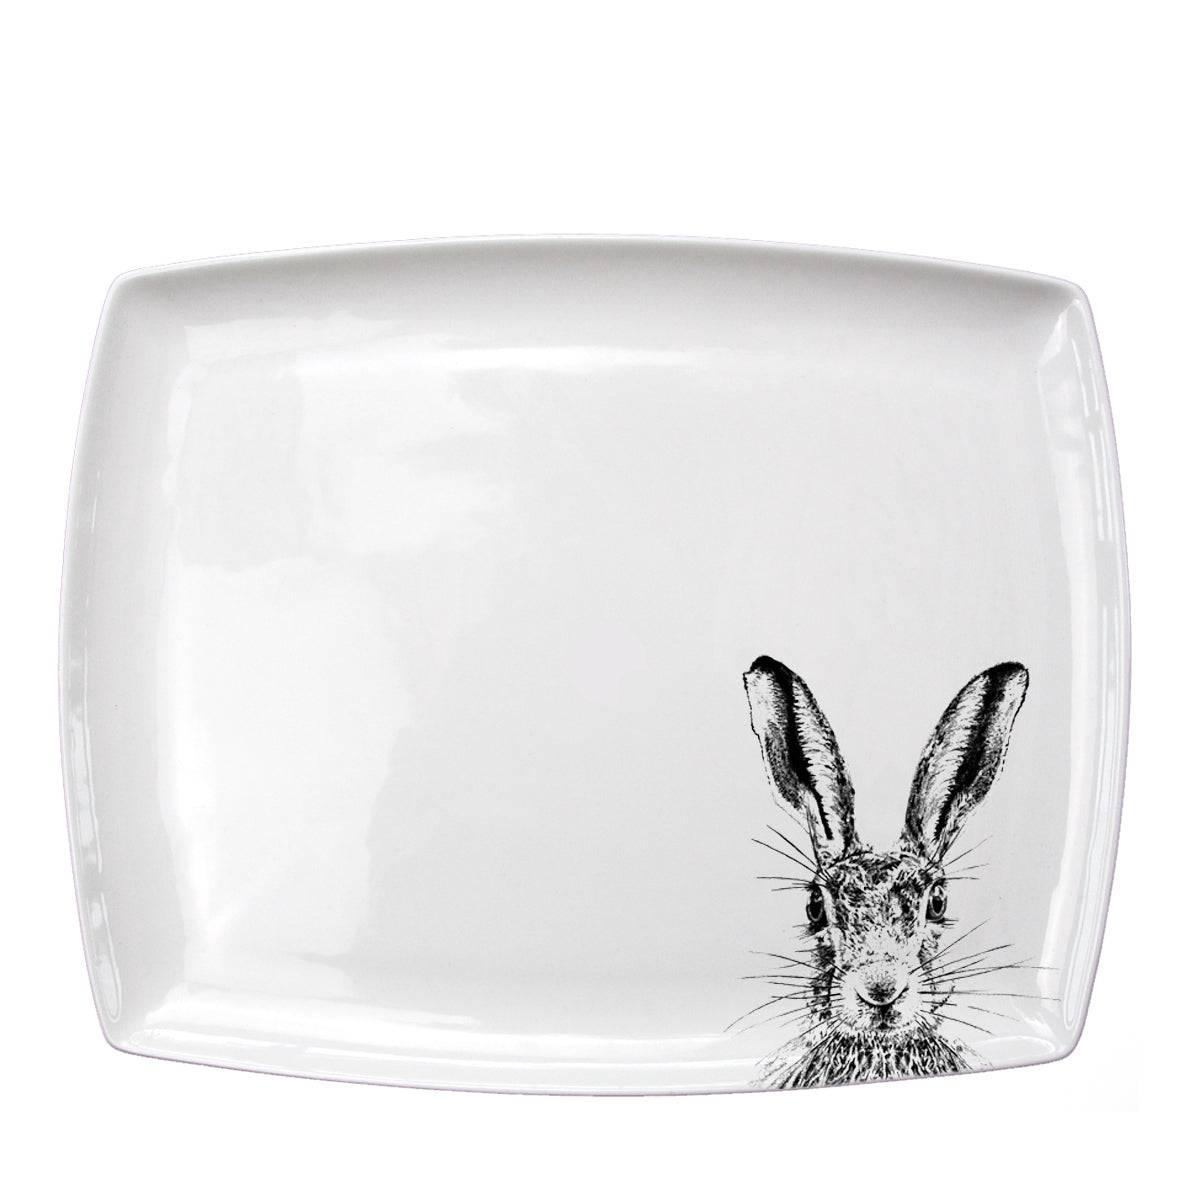 Sassy Hare Platter - Large for sale - Woodcock and Cavendish